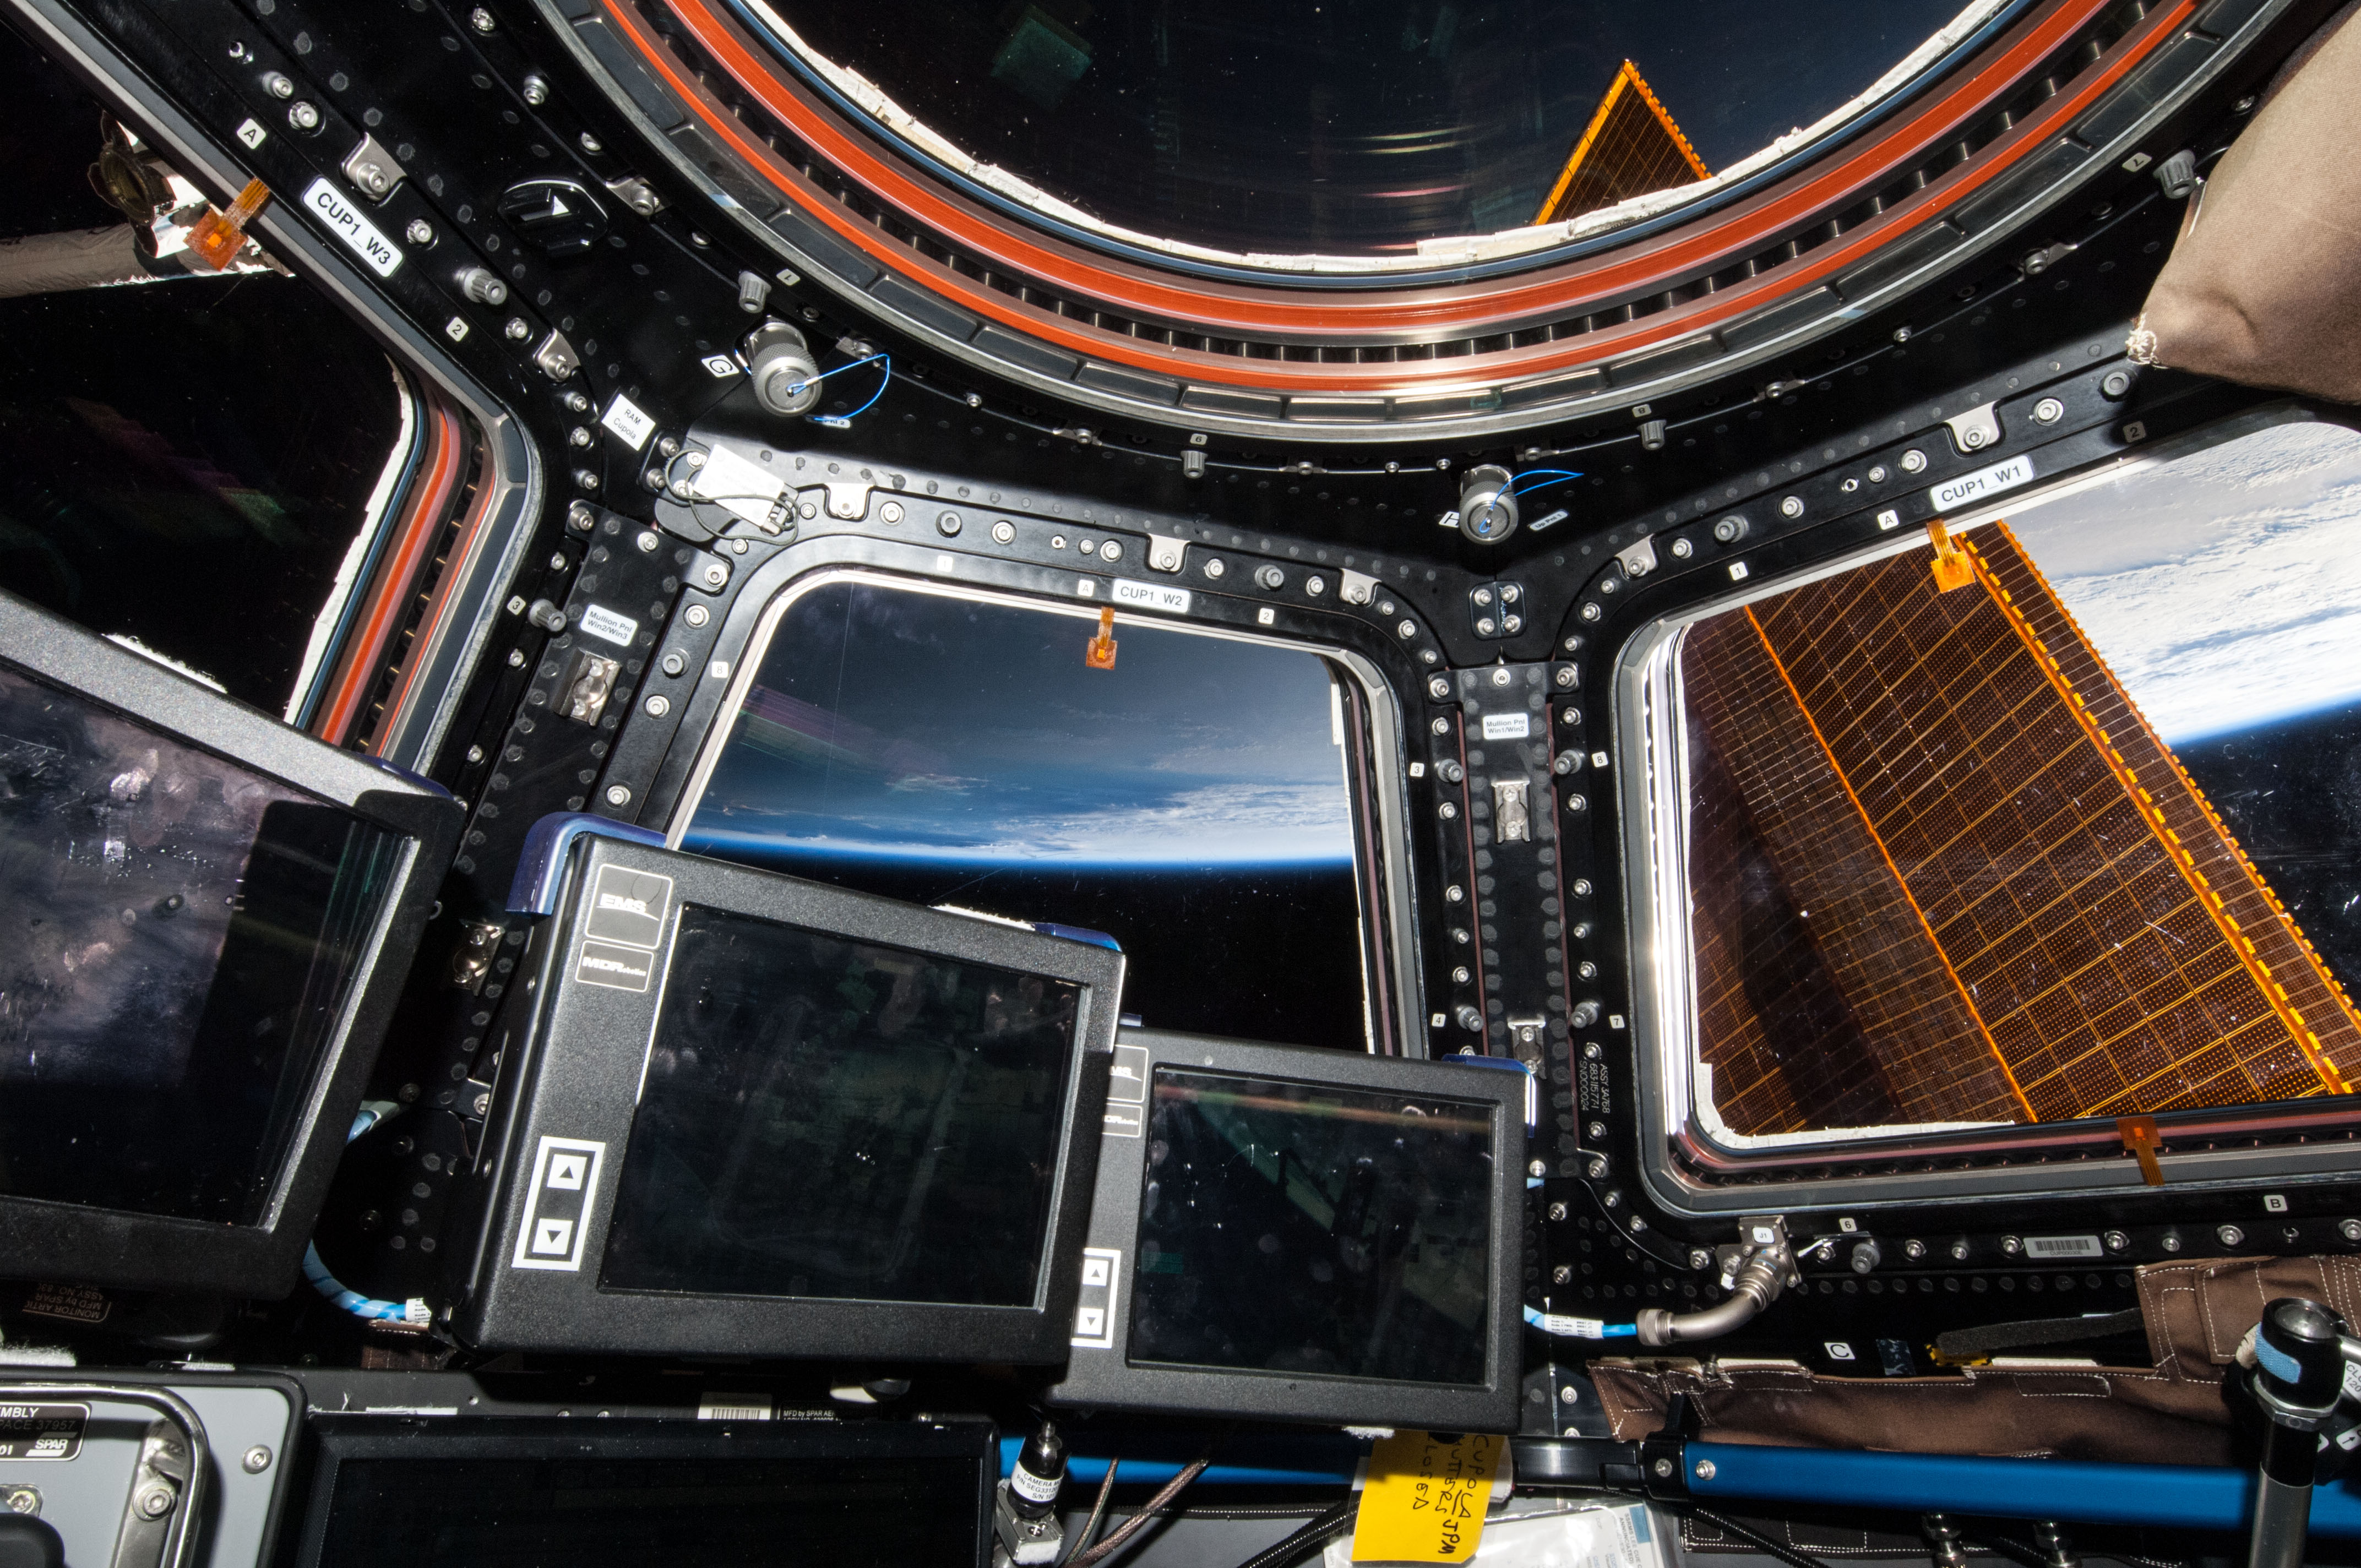 The layout of Robotic Work Station (RWS) and other hardware in the multi-windowed cupola for the capture and berthing of HTV-4. Photo Credit: NASA